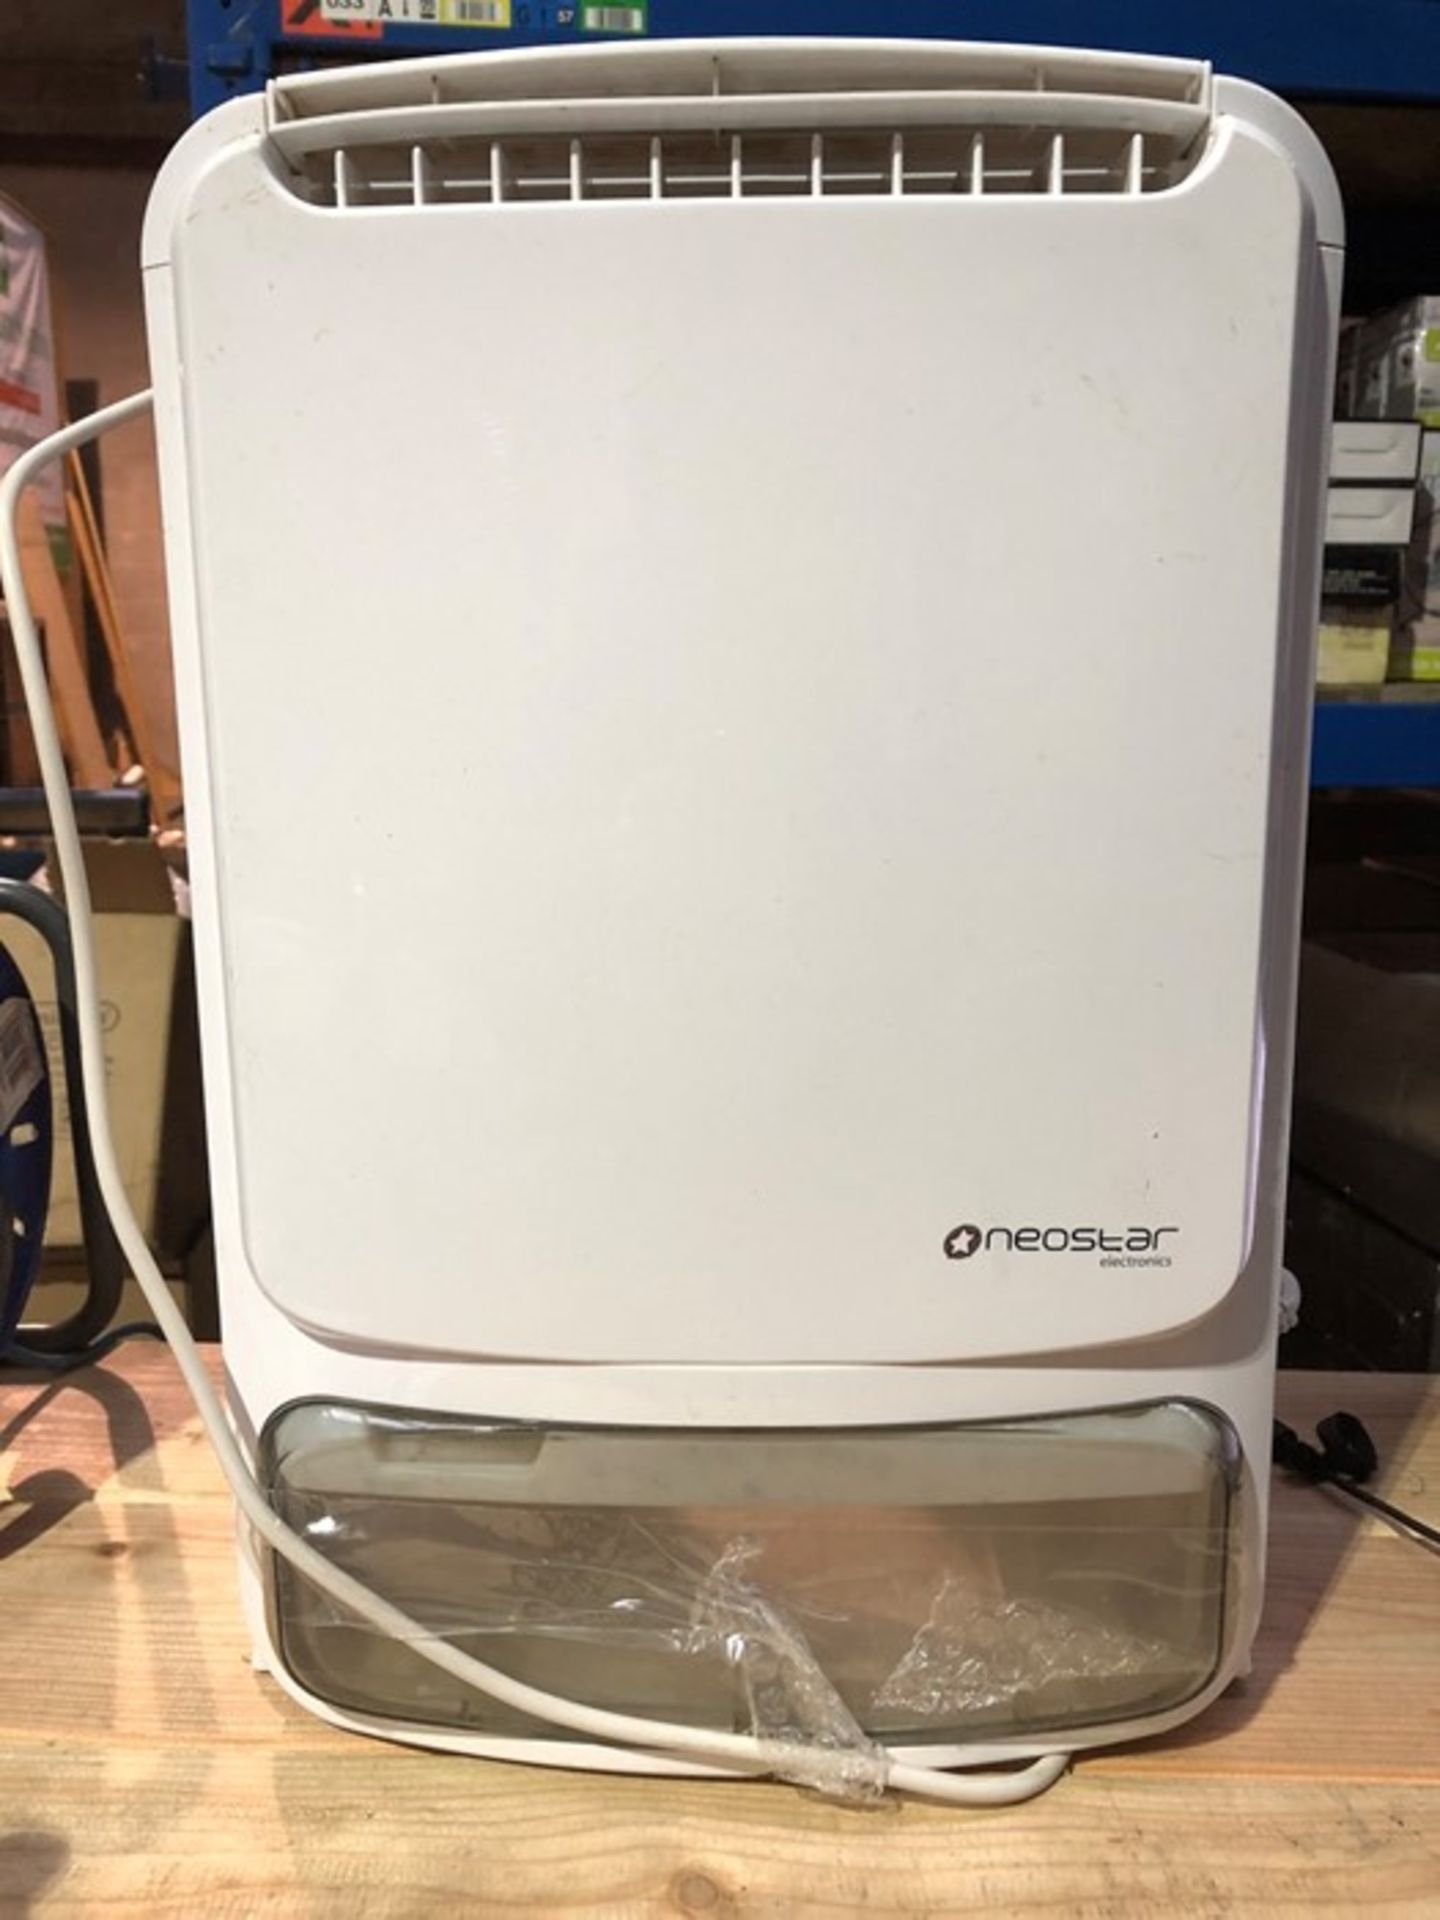 1 NEOSTAR DEHUMIDIFIER IN WHITE (PUBLIC VIEWING AVAILABLE)